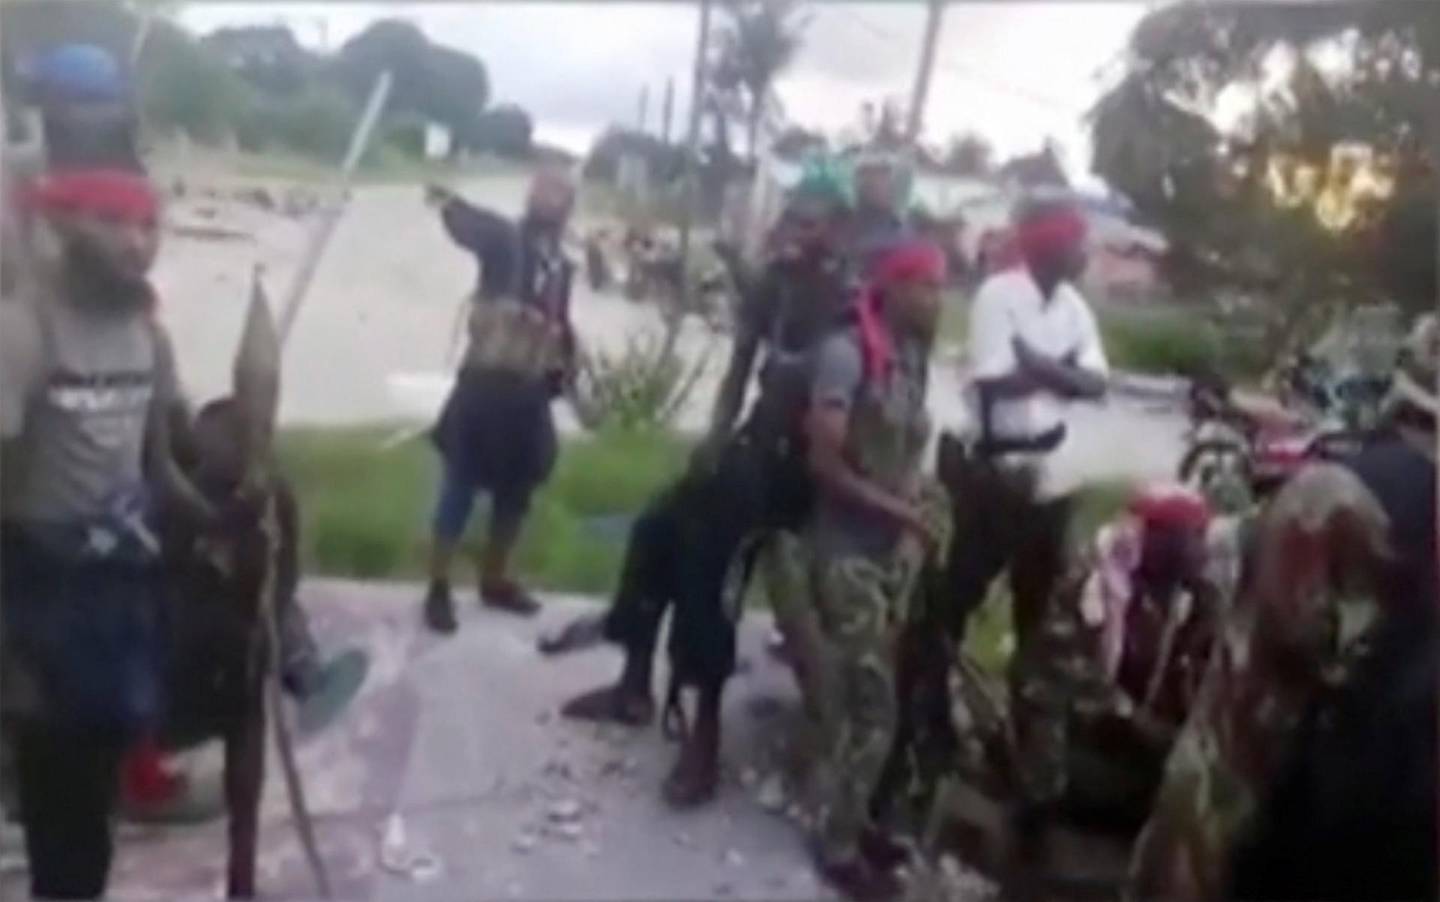 In this image taken from militant video released by the Islamic State group on Monday March 29, 2021, purporting to show fighters near the strategic north eastern Mozambique town of Palma, as the militant group claimed it had taken control of the area after five days of conflict.  The video from the Islamic State group claims to show fighters in or near Palma, but cannot be independently verified by The Associated Press. (AMAQ Militant video via AP)